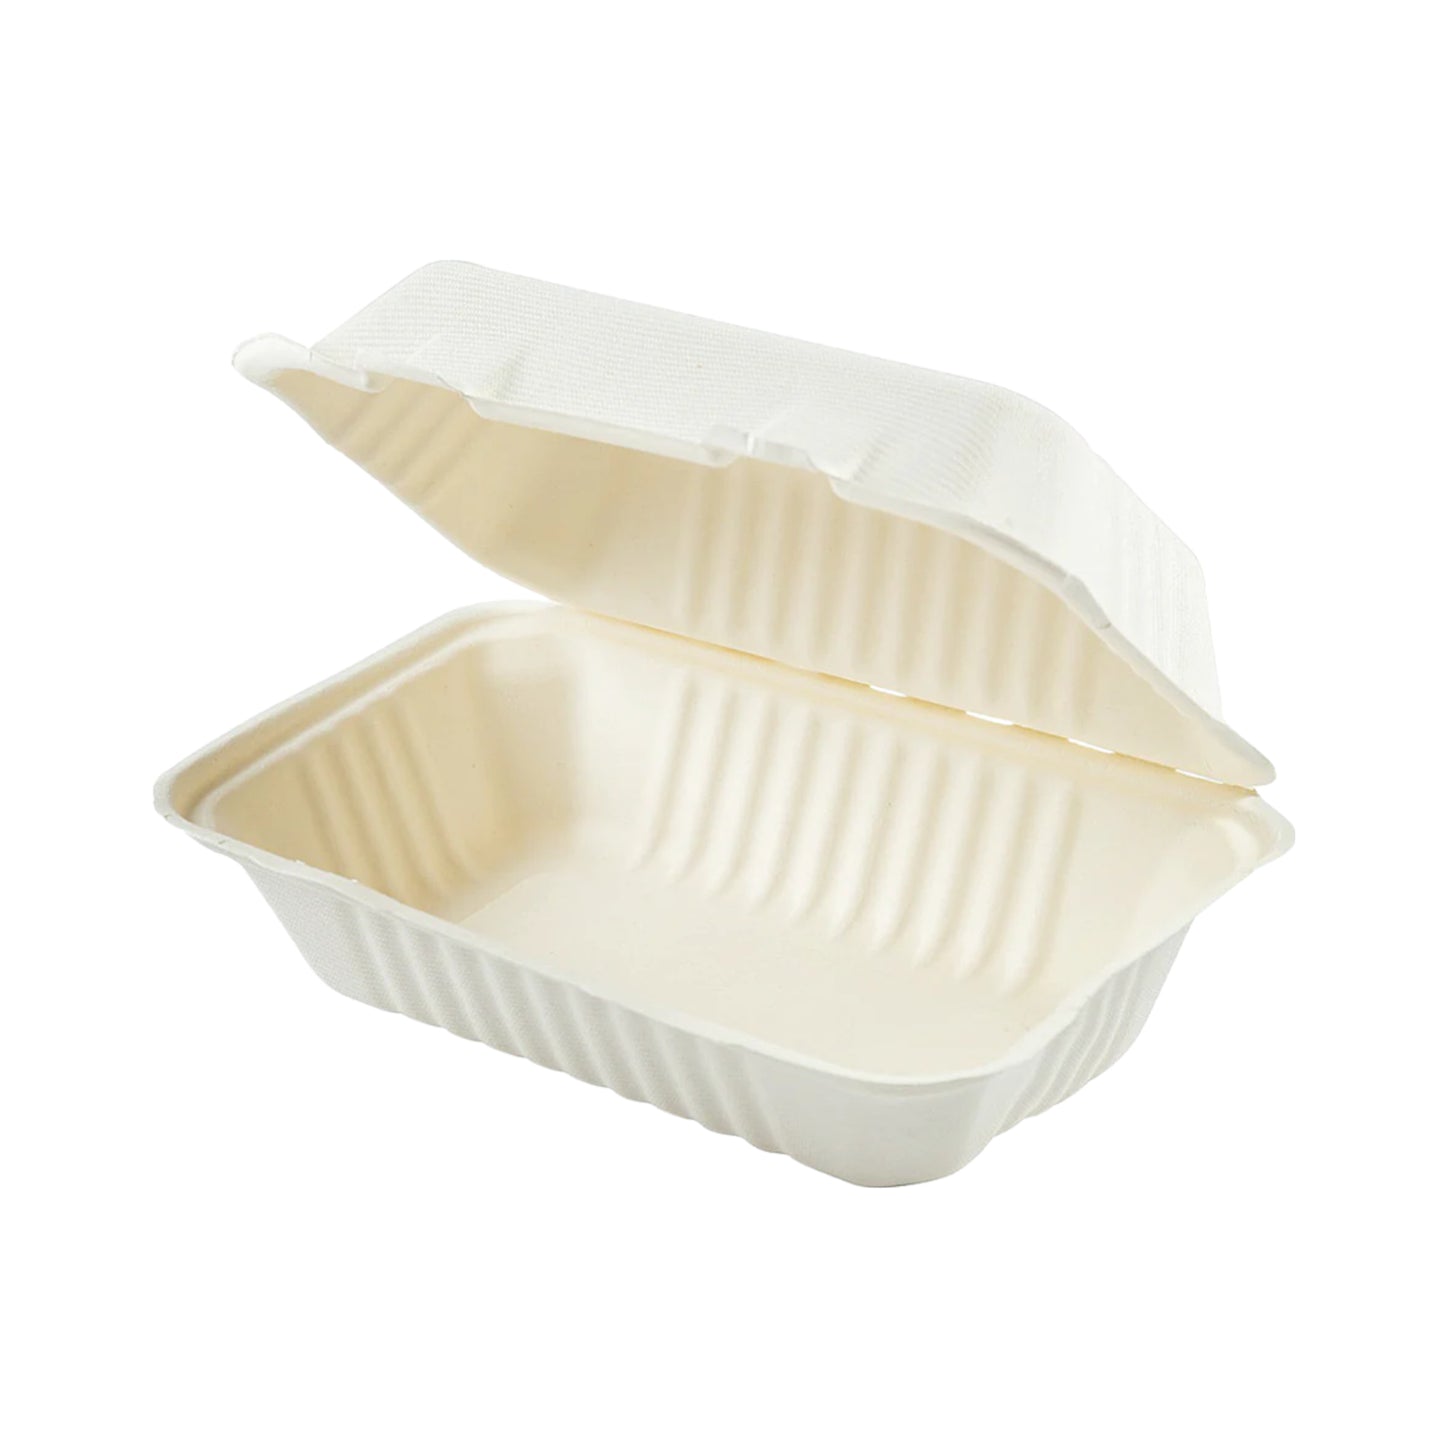 KIS-S96321G | 9x6x3.2 inches, 1-Compartment, Sugarcane Deep Clamshell Food Container; $0.180/pc